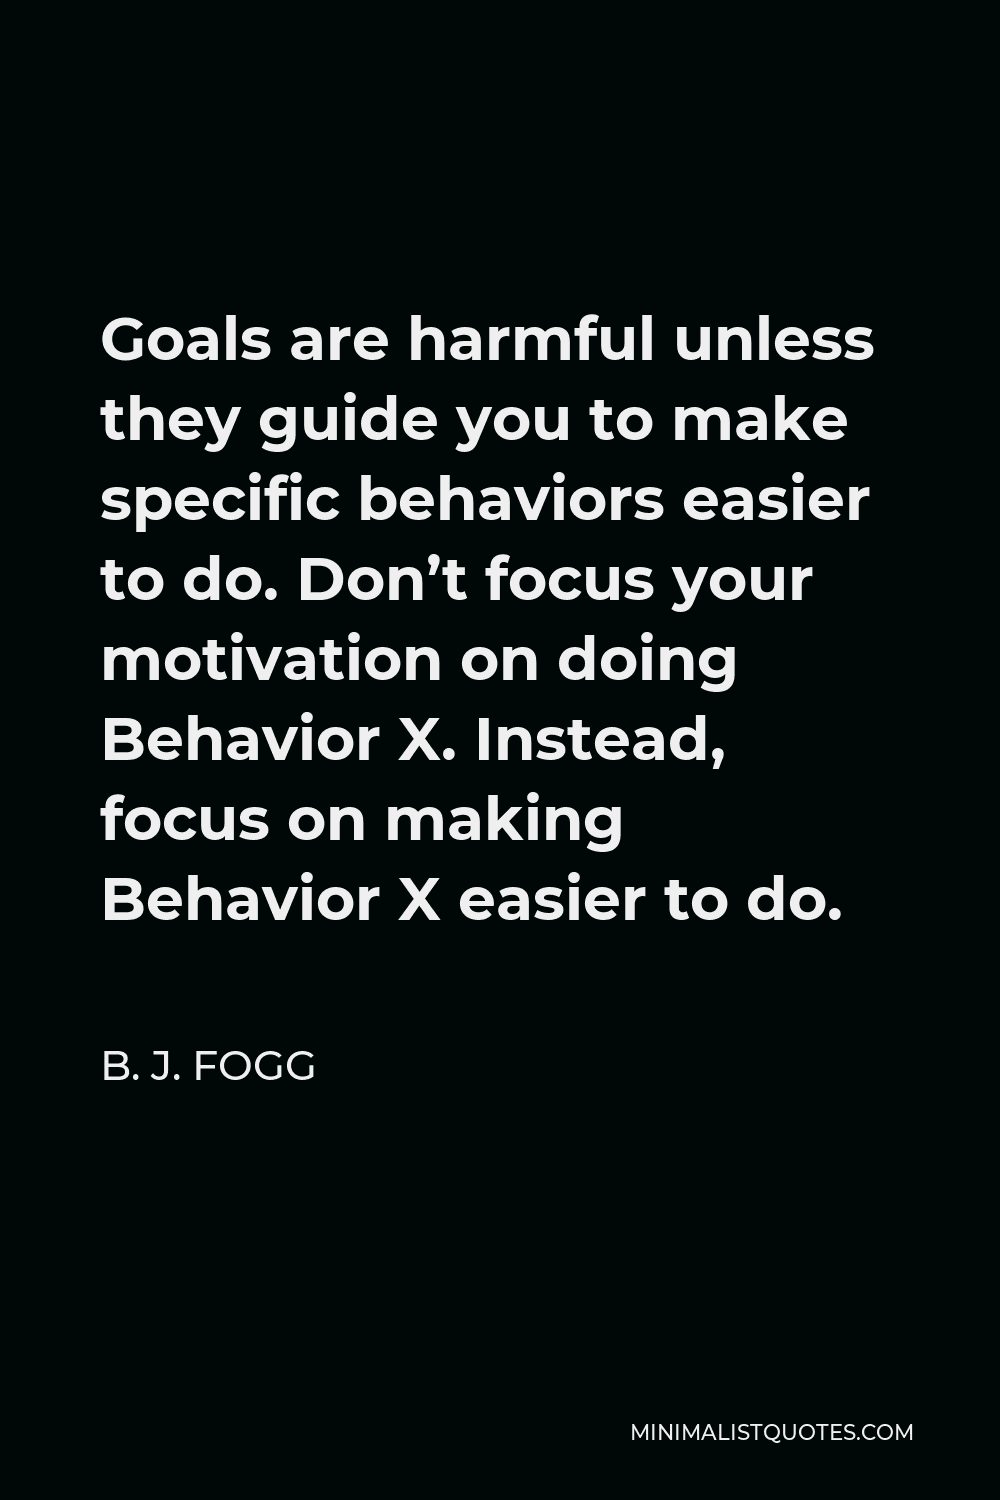 B. J. Fogg Quote - Goals are harmful unless they guide you to make specific behaviors easier to do. Don’t focus your motivation on doing Behavior X. Instead, focus on making Behavior X easier to do.